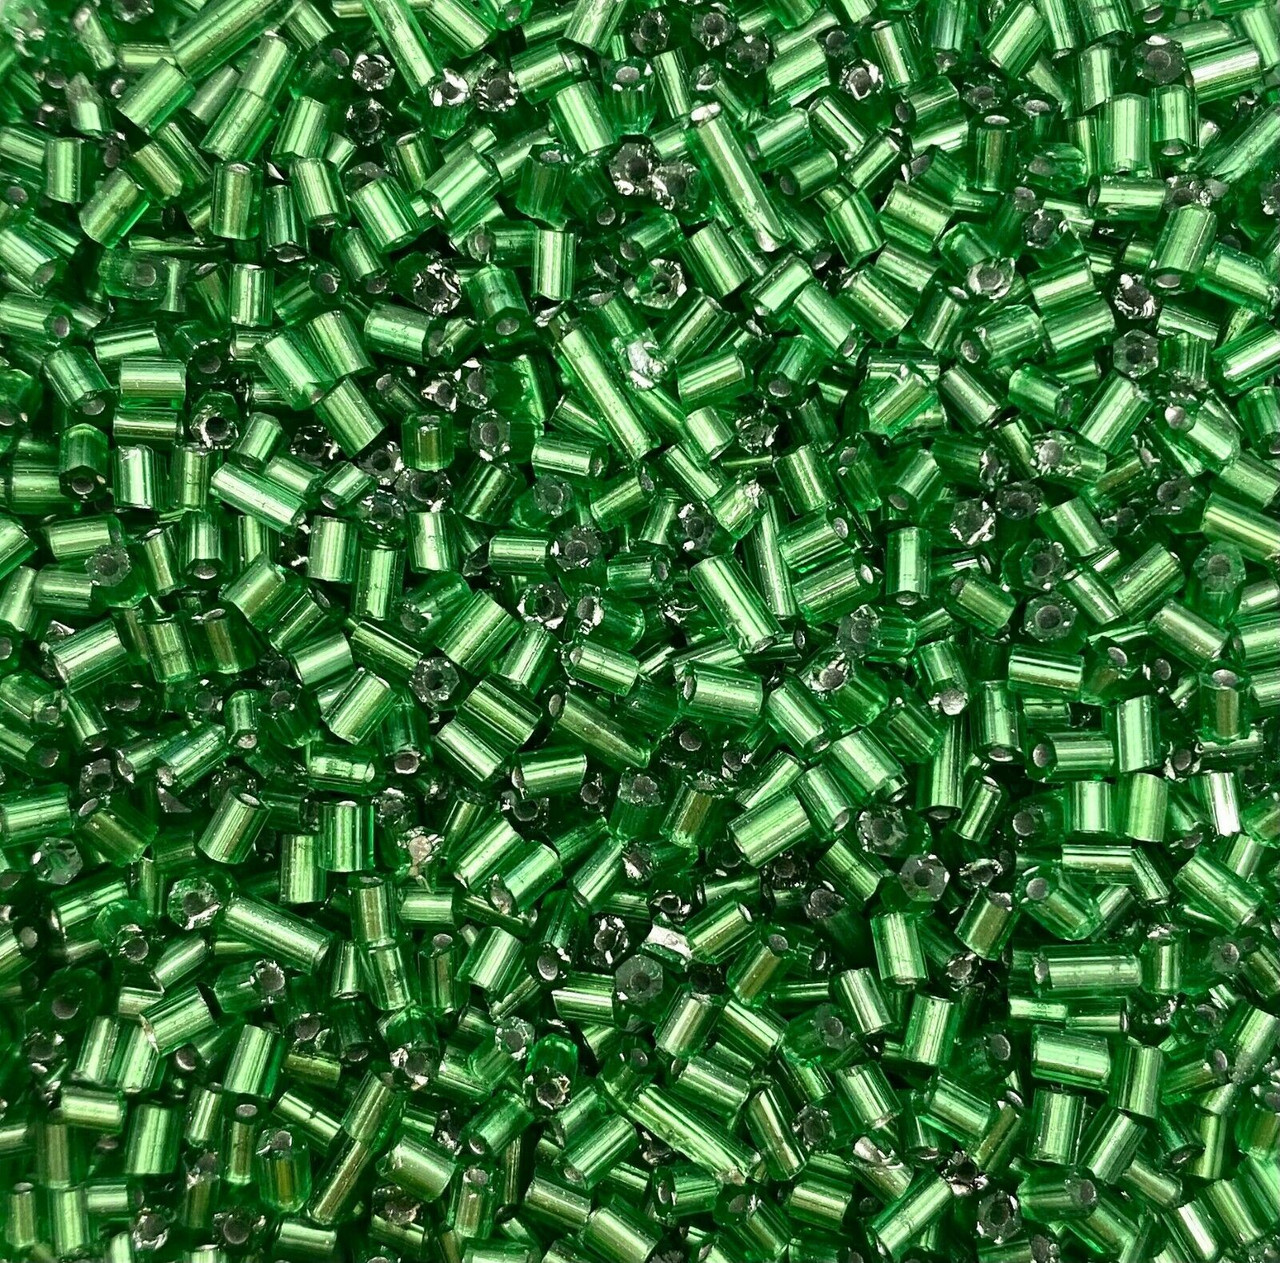 50g glass HEX seed beads - Green Silver-Lined, size 11/0 (approx 2mm)